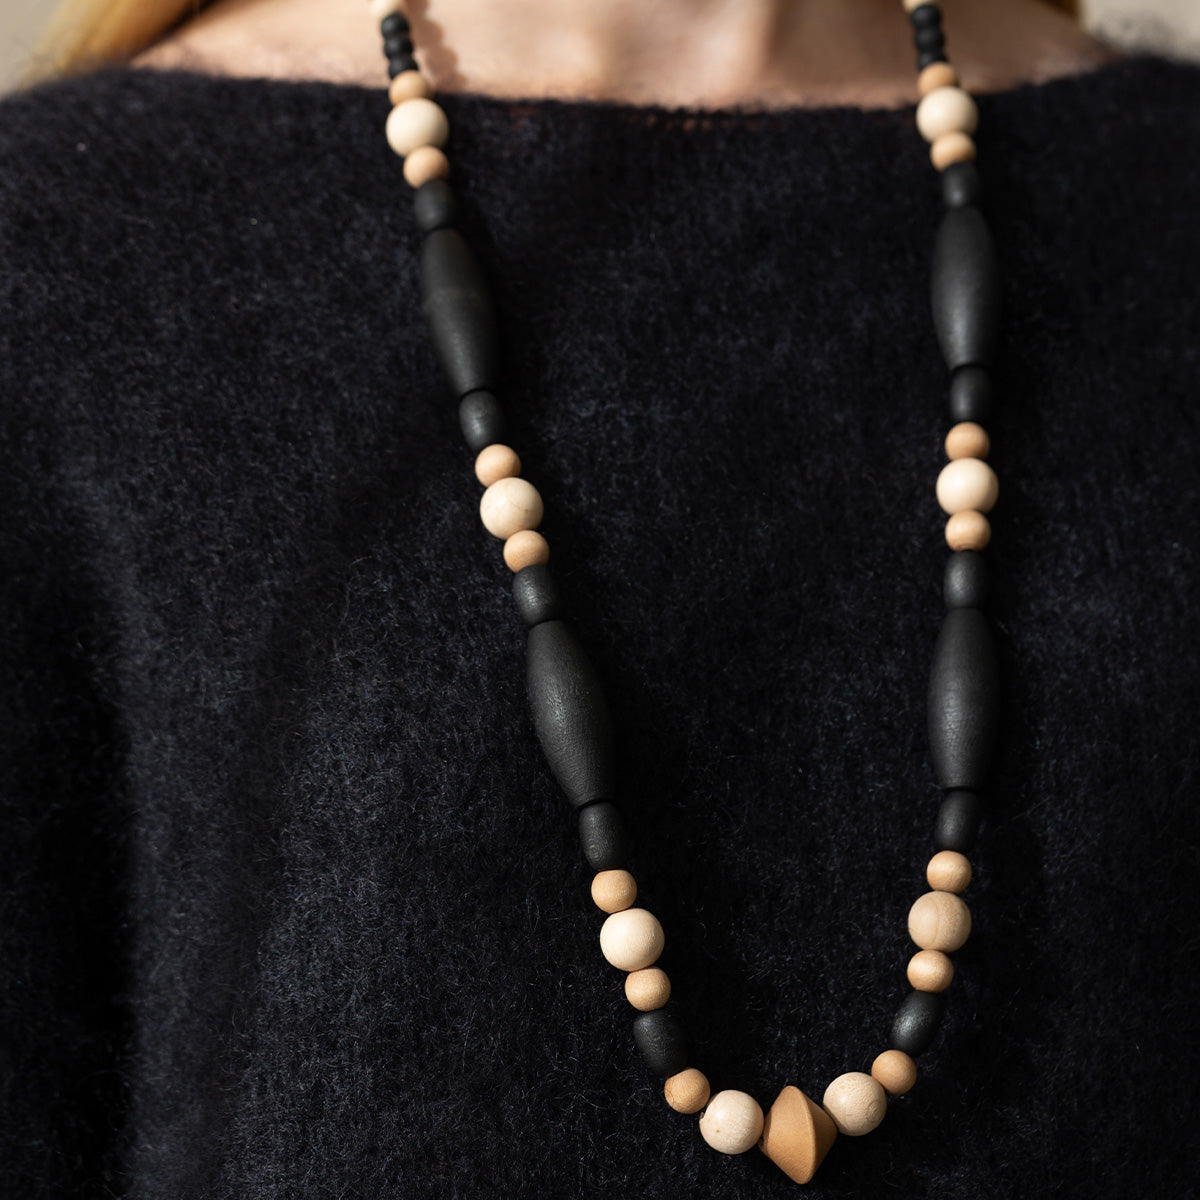 Anita necklace, black and brown